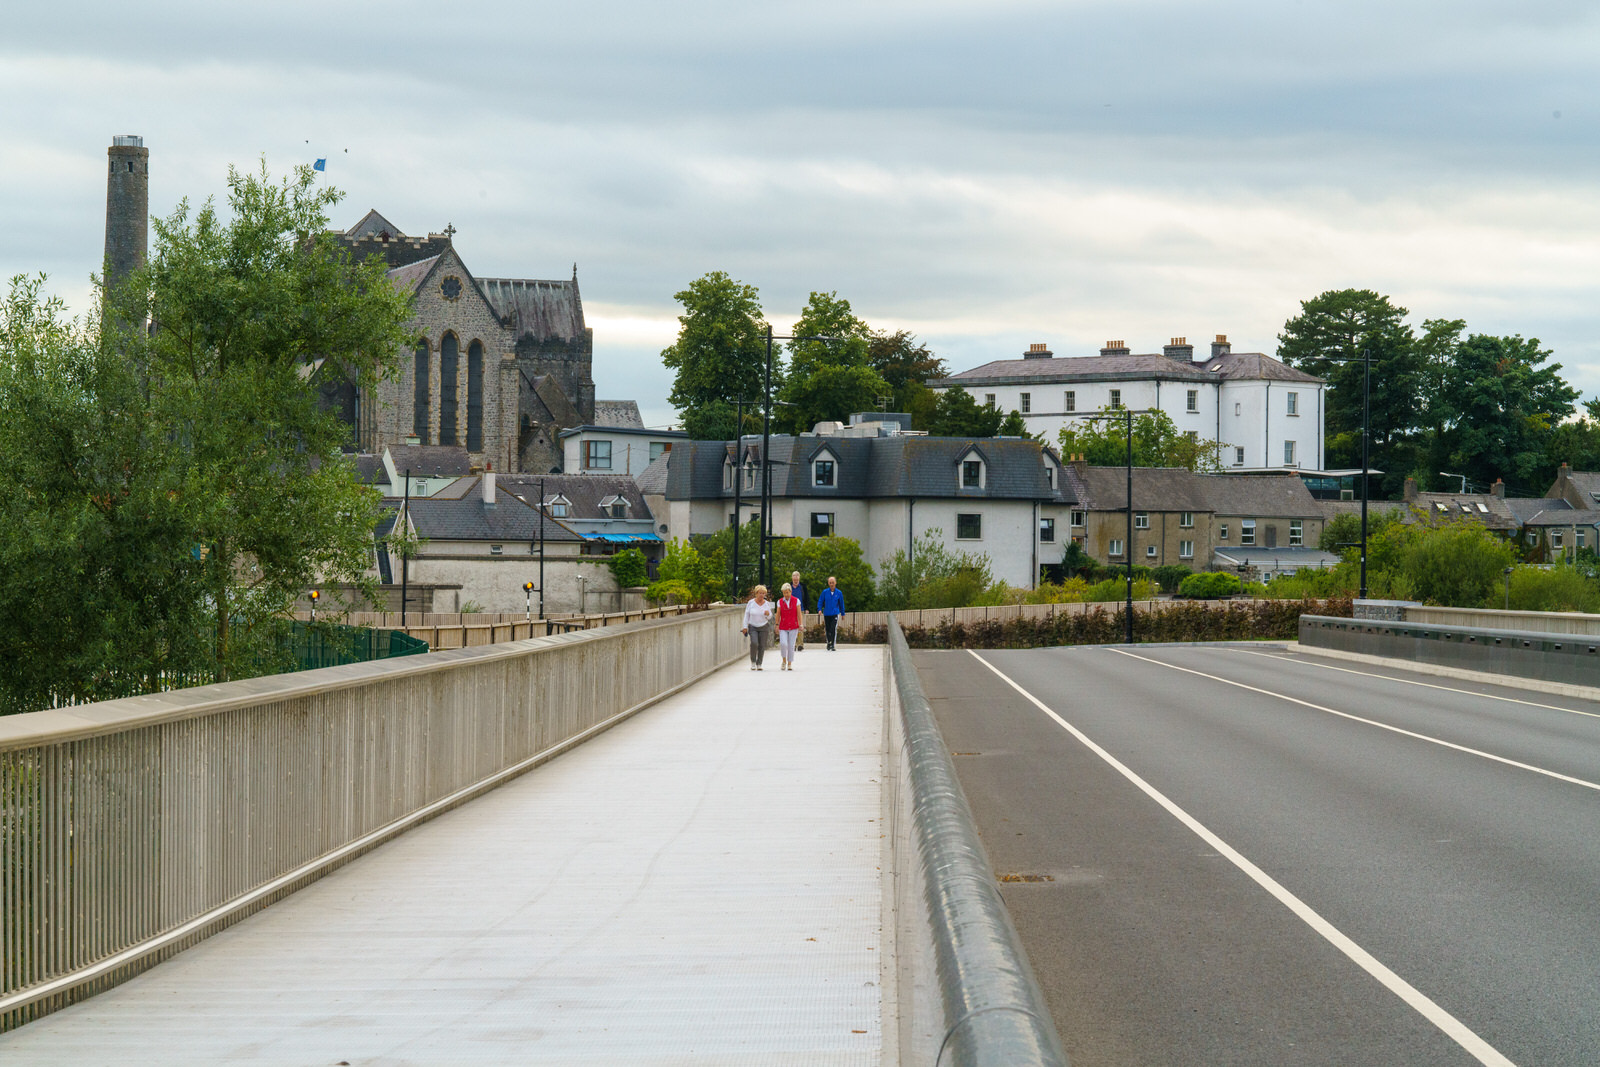 THE NEW ST FRANCIS BRIDGE IN KILKENNY AND THE SURROUNDING AREA [OPENED TO THE PUBLIC IN 2017]-227054-1